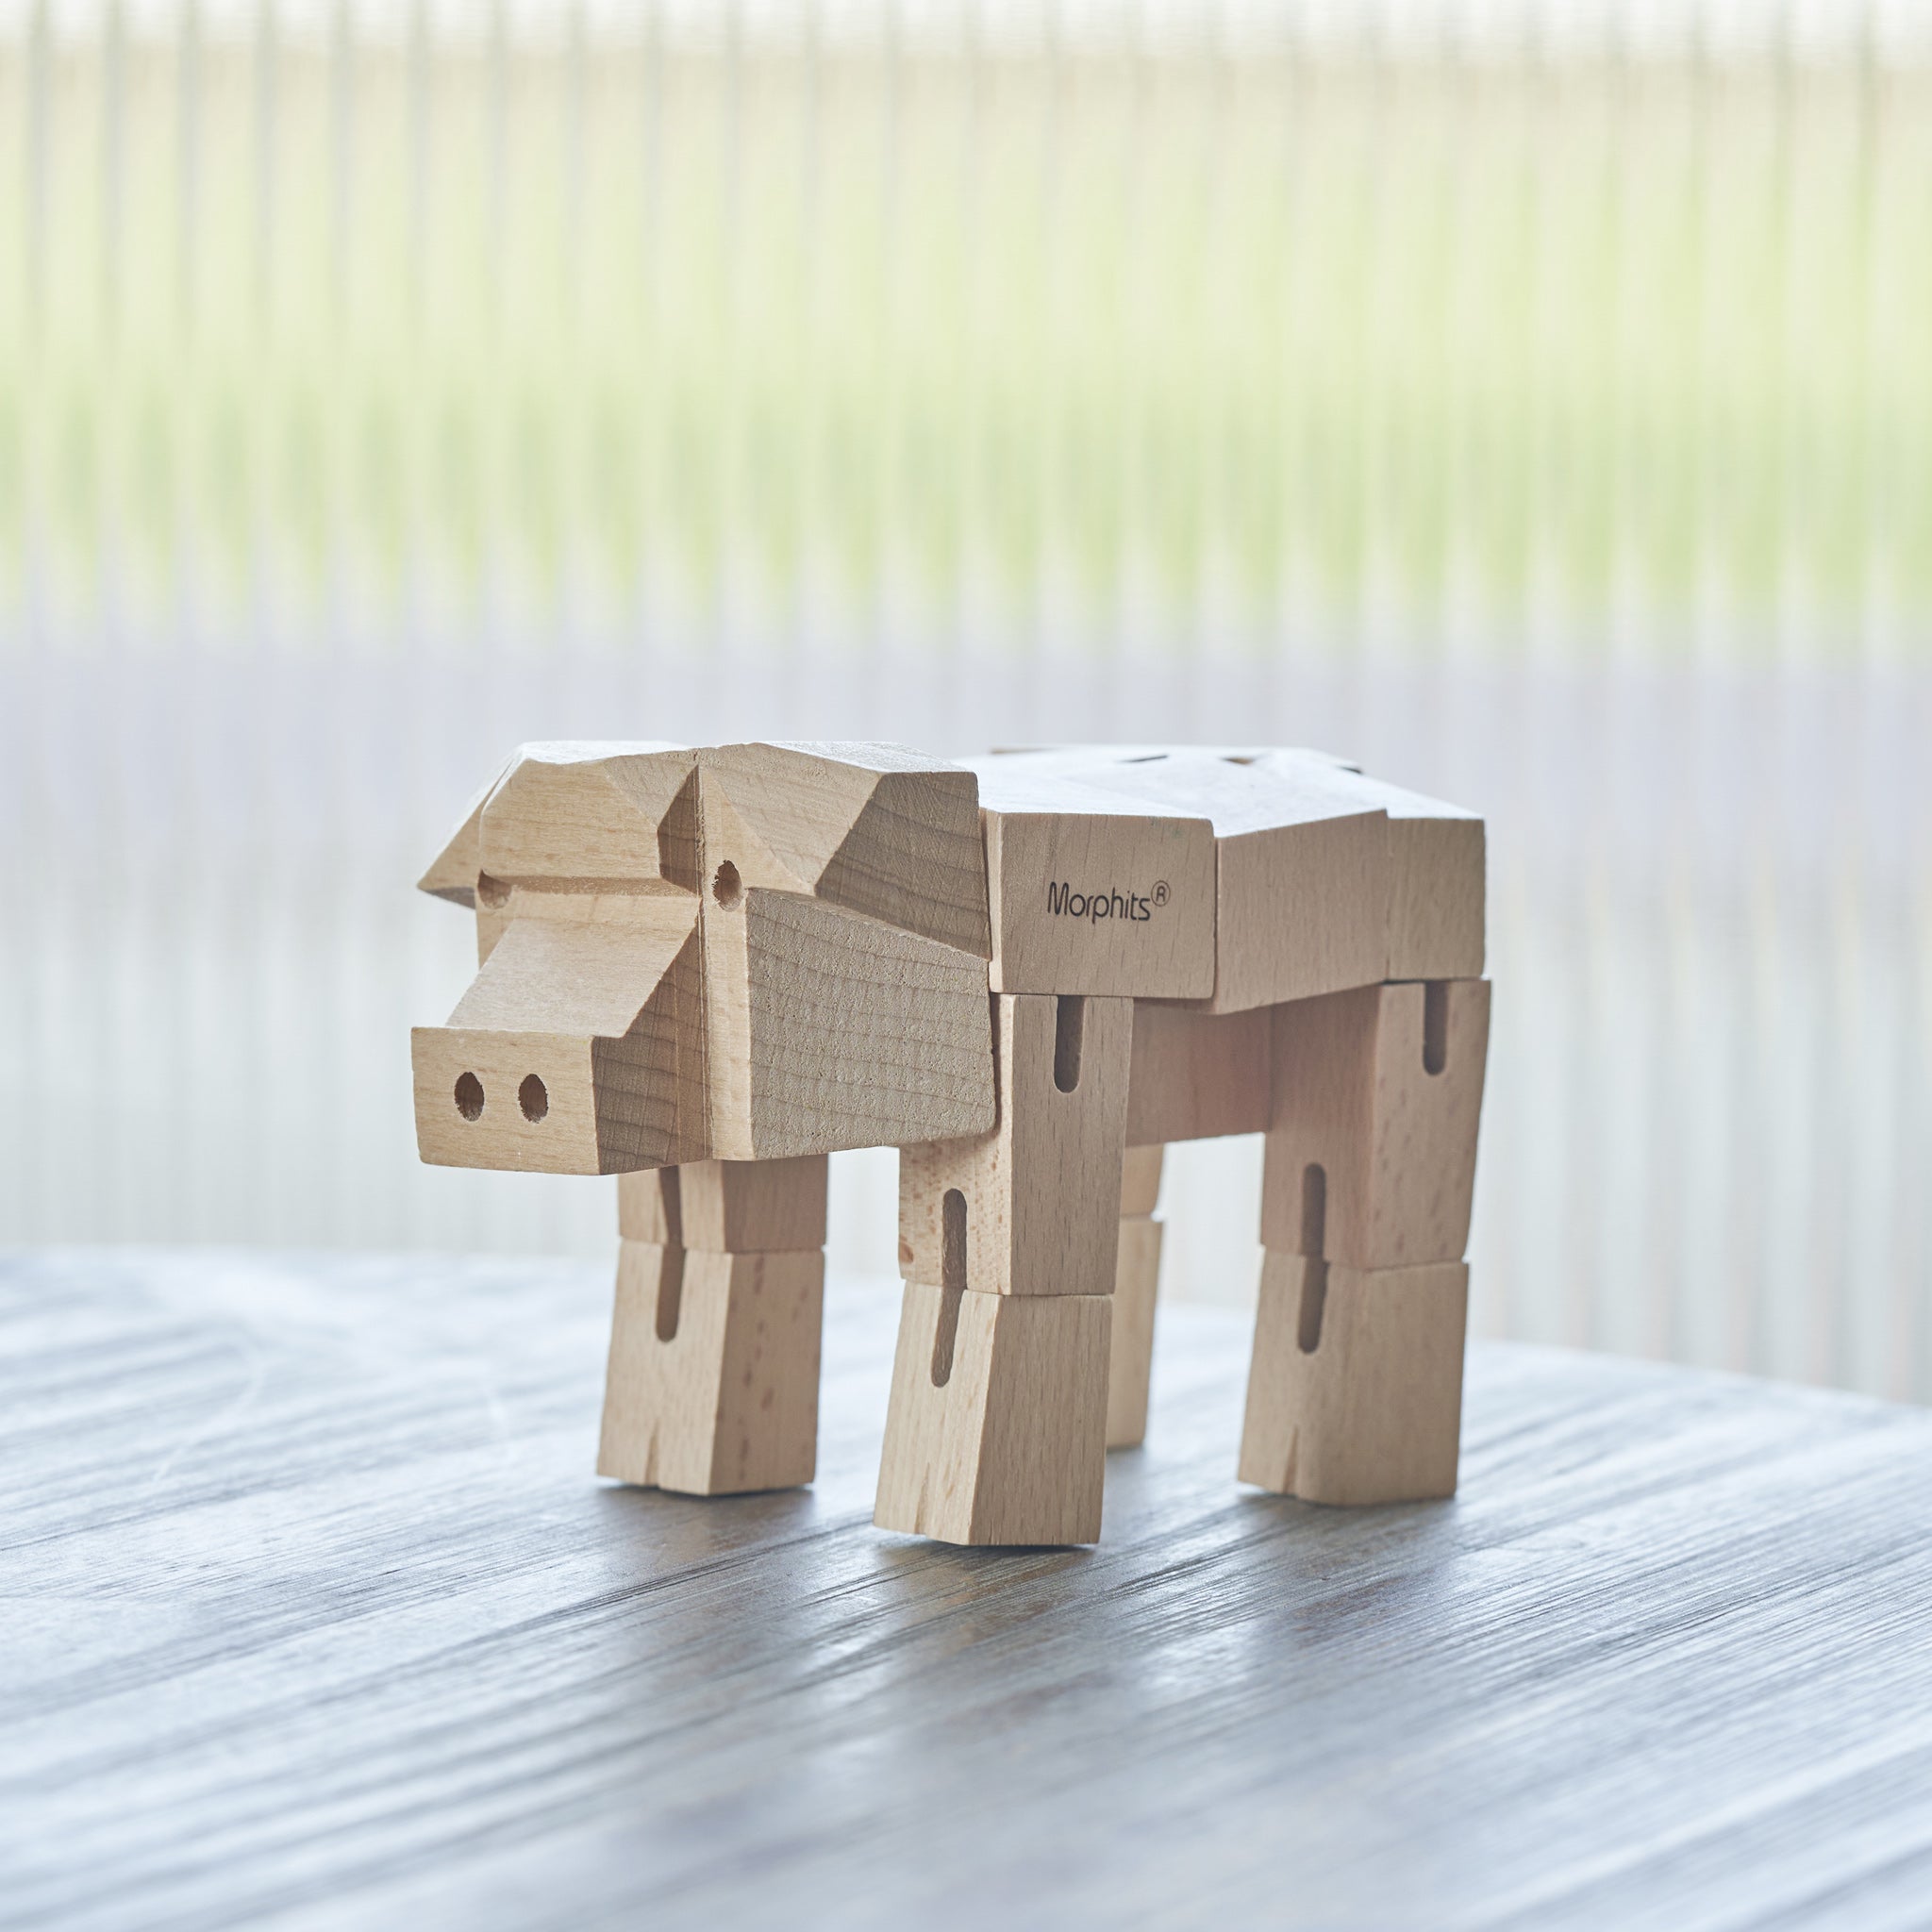 Morphits ® Pig Wooden Toy: Whimsical Wooden Playset Companions for Imaginative Minds - Yoshiaki Ito Design Stand N2